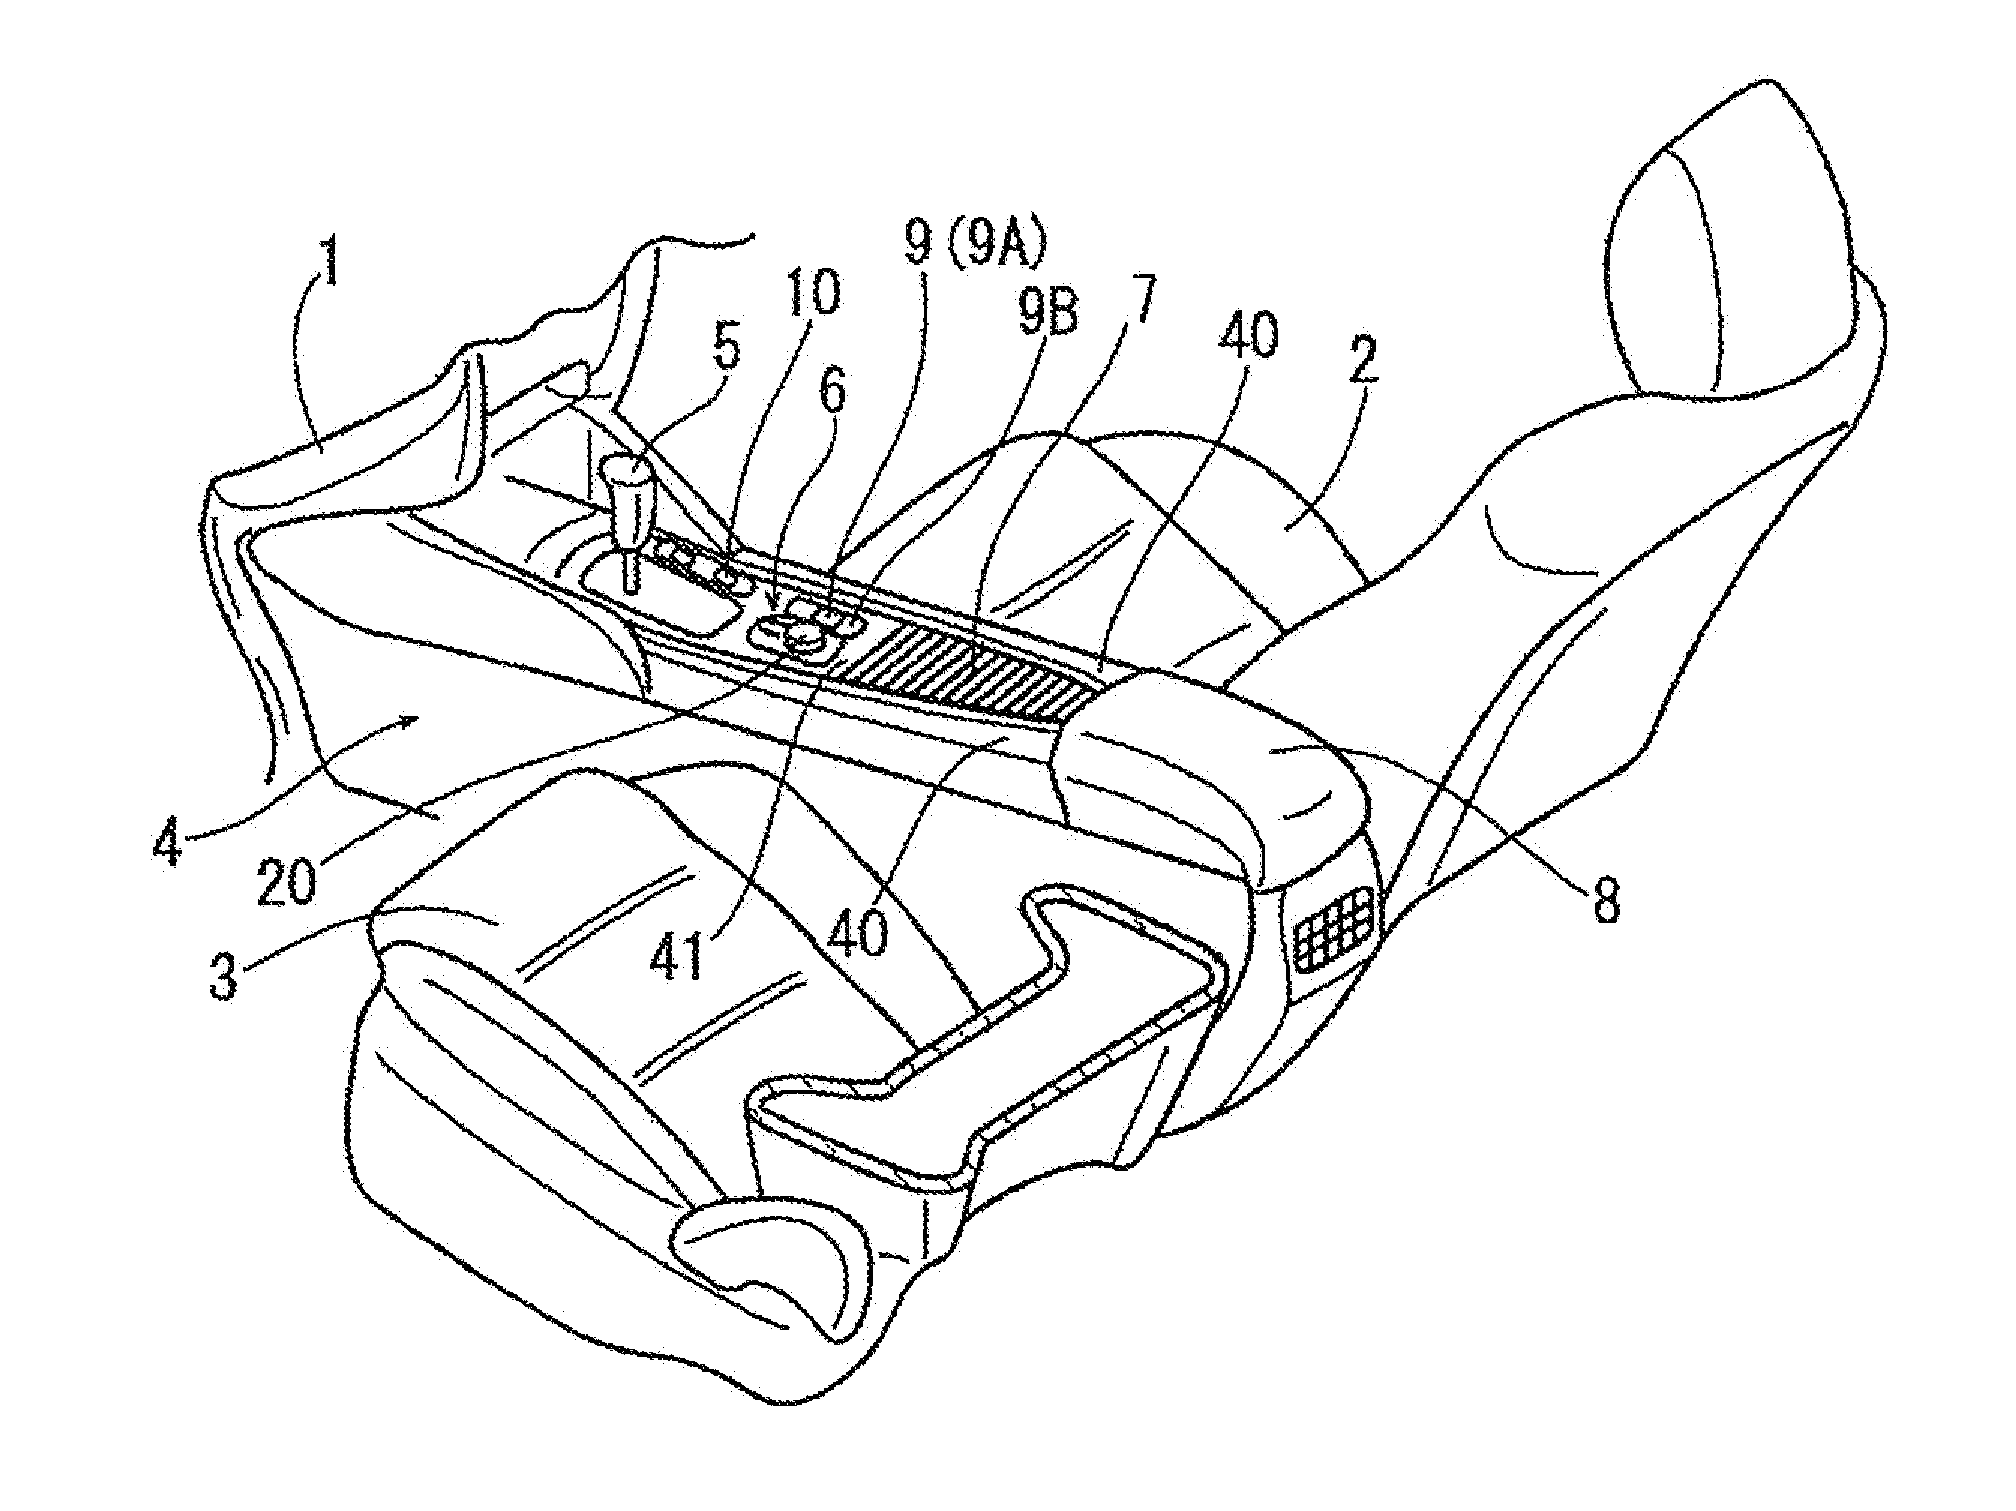 Center console structure of vehicle